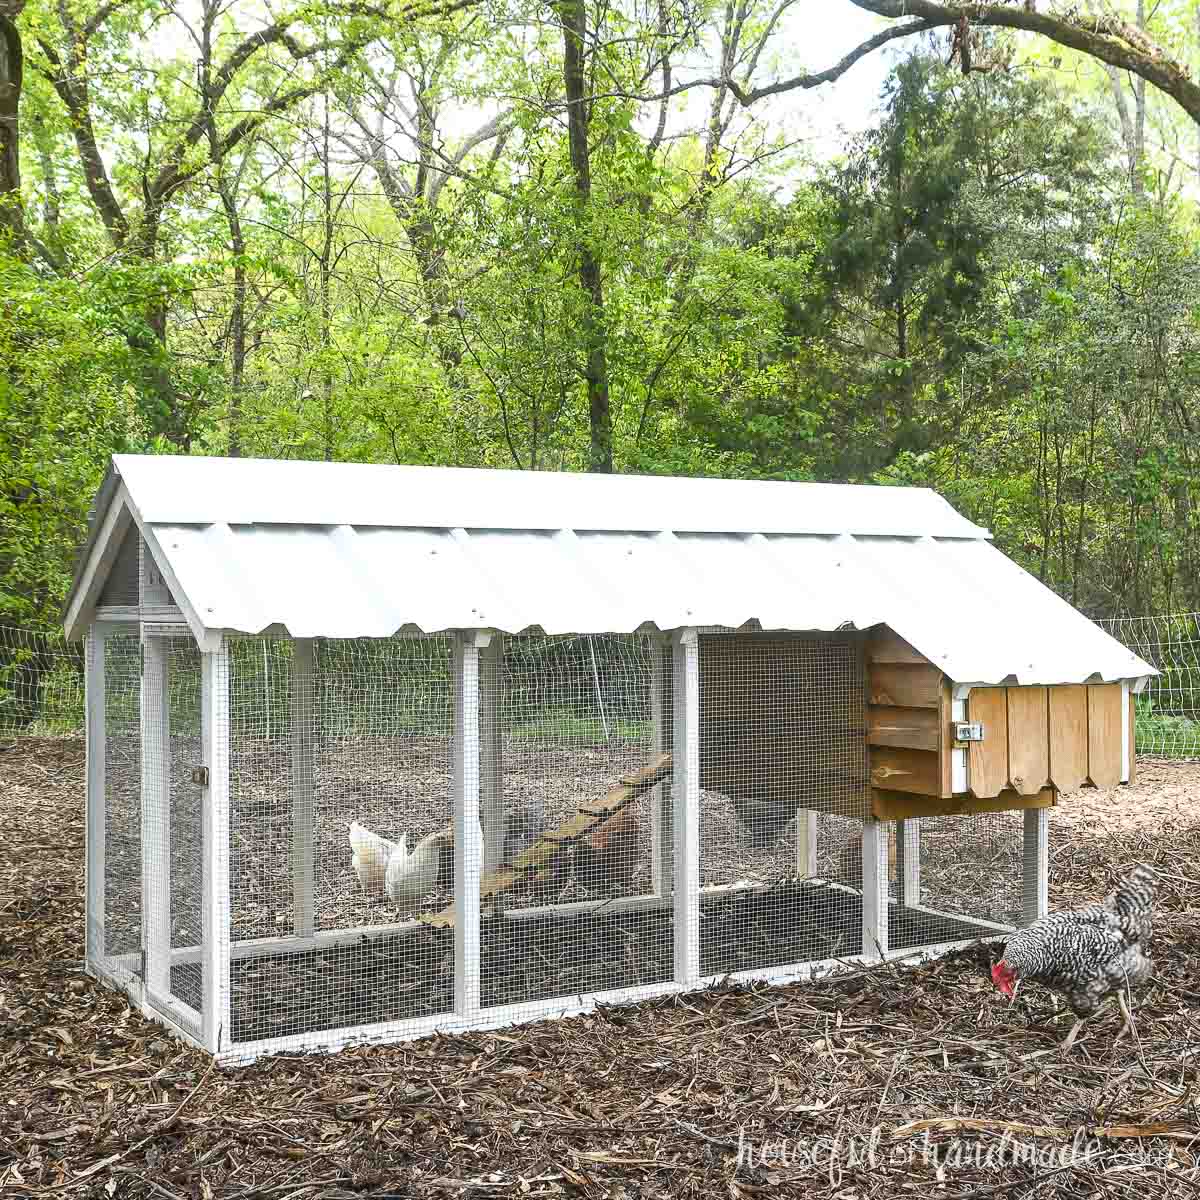 8' long chicken run with small coop built into one end.